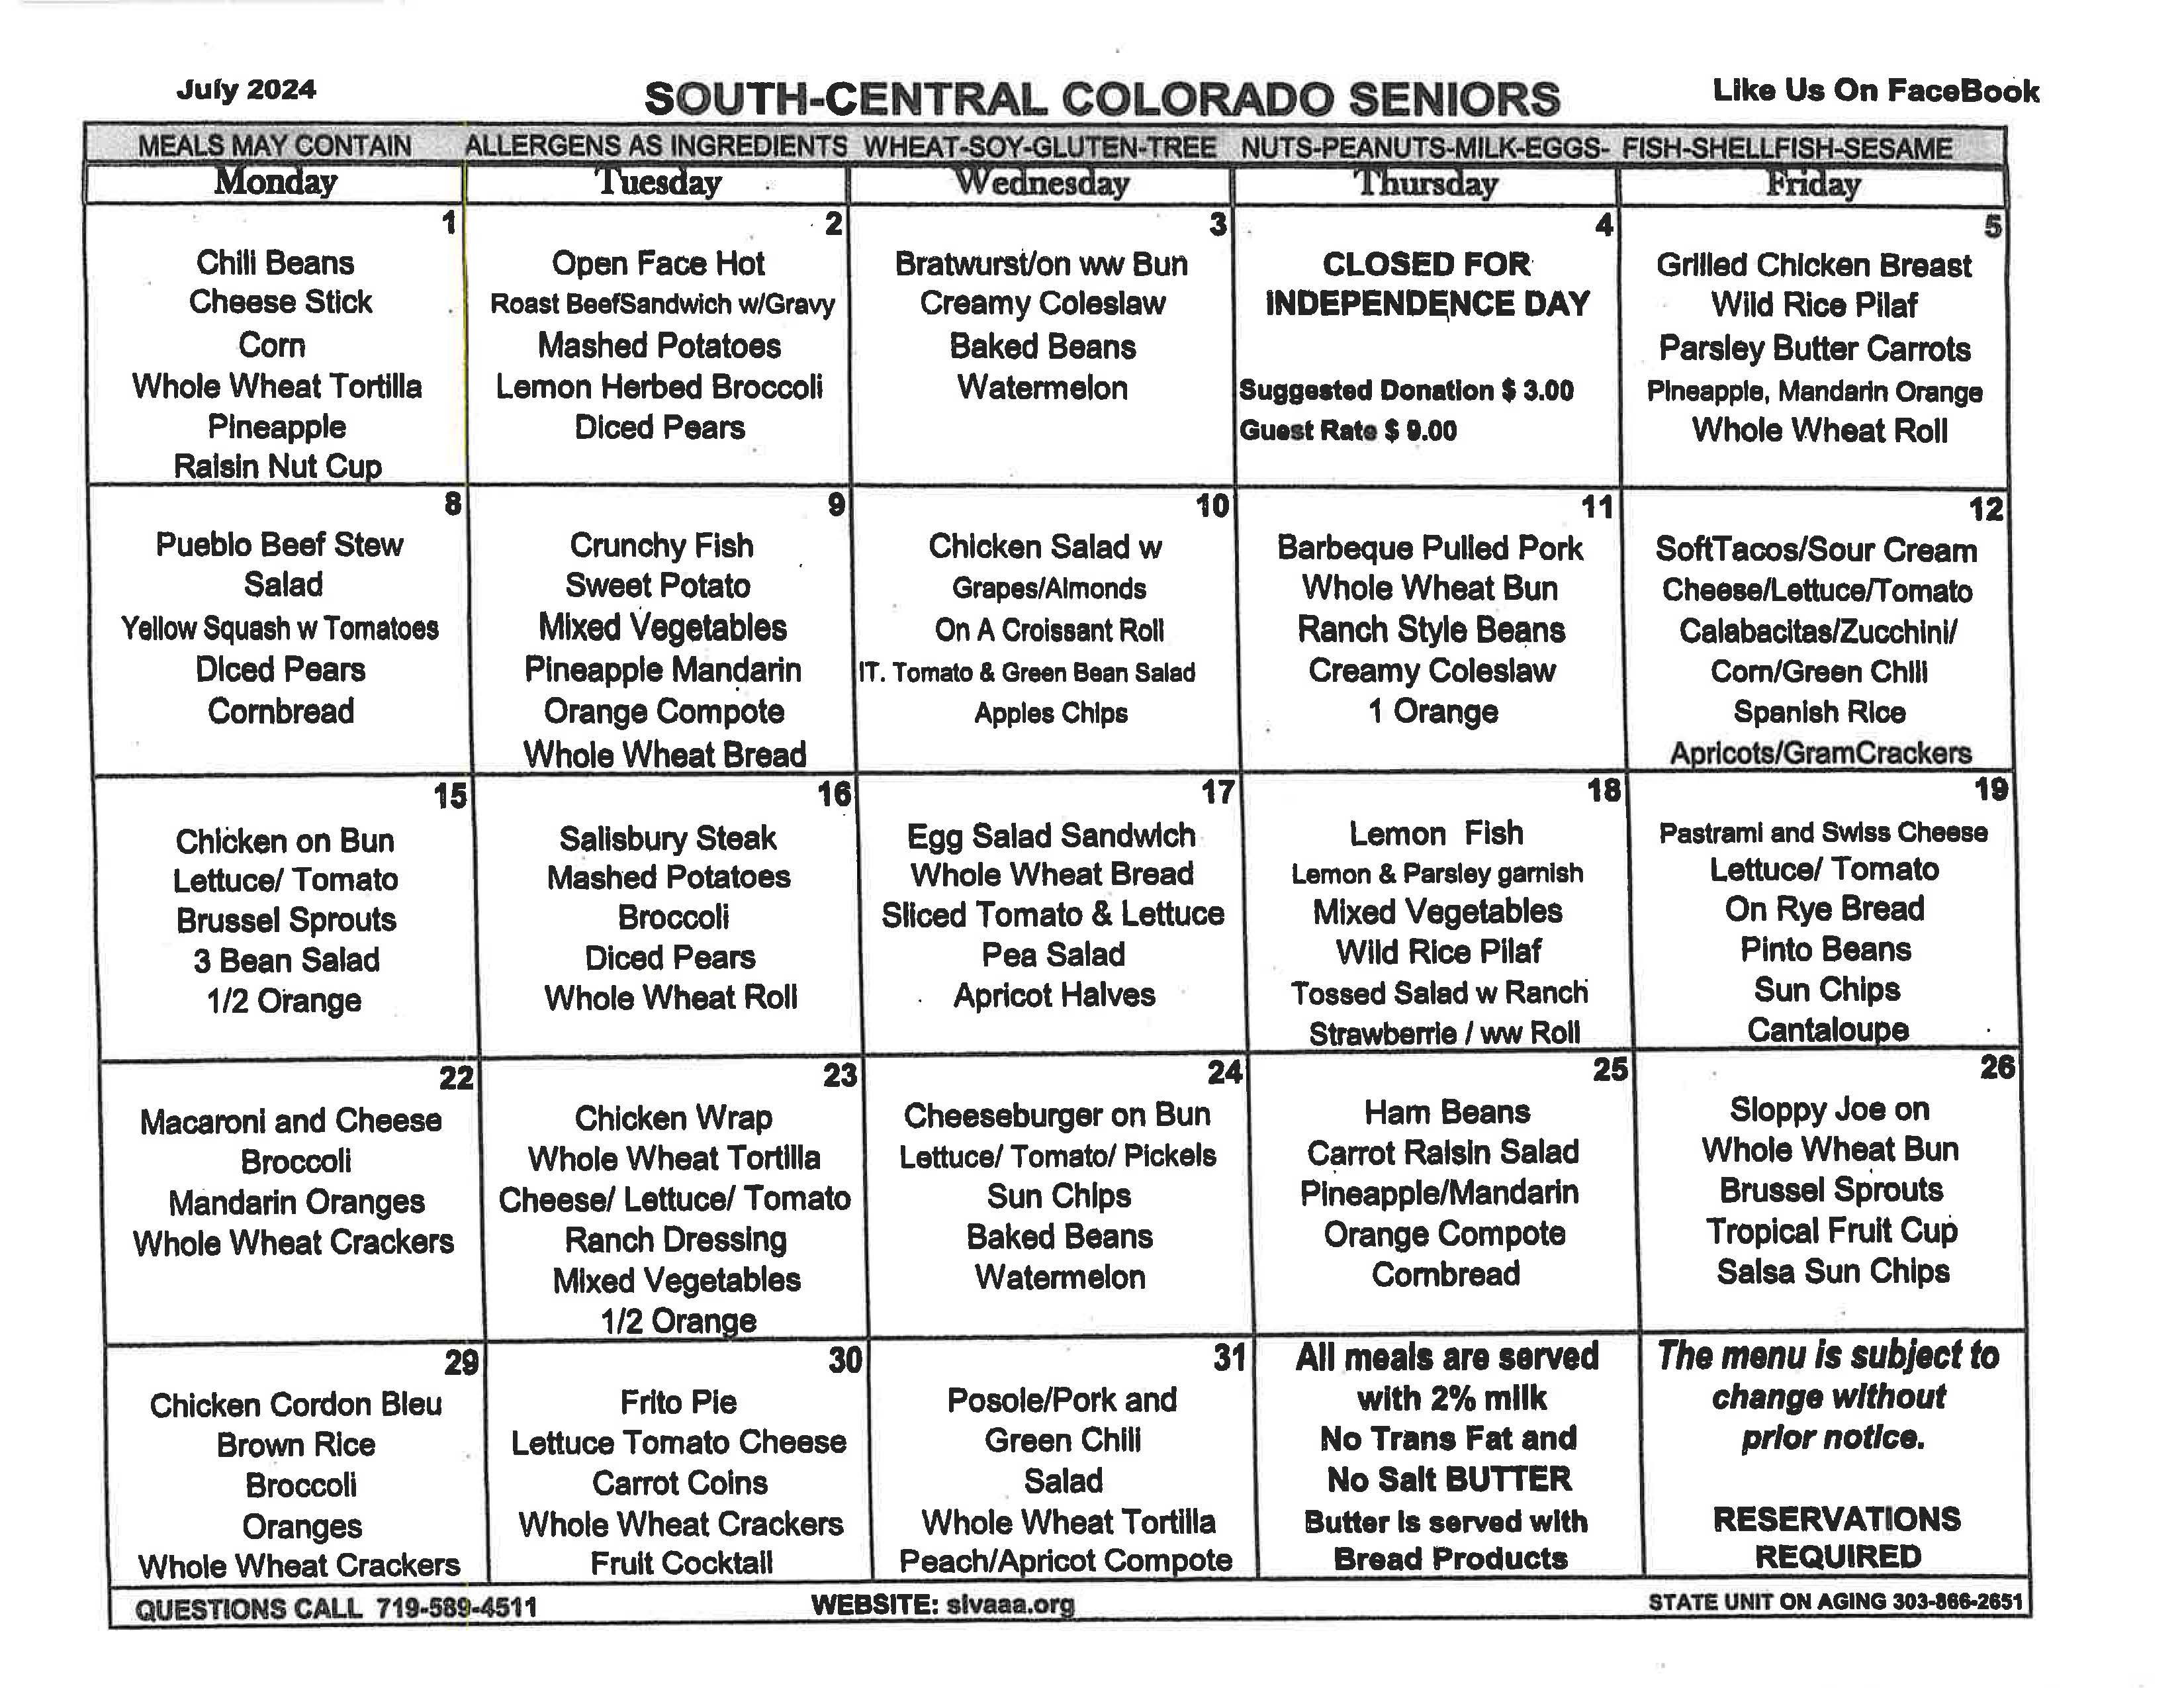 The image displays a menu titled ‘South-Central Colorado Seniors’ for July 2026, with a detailed meal plan for weekdays. Each day offers a main dish, sides, and dessert options. The menu also includes information about no salt/sugar substitutions and beverage choices. It mentions ‘Like Us On FaceBook’ at the top right corner and has contact details at the bottom.